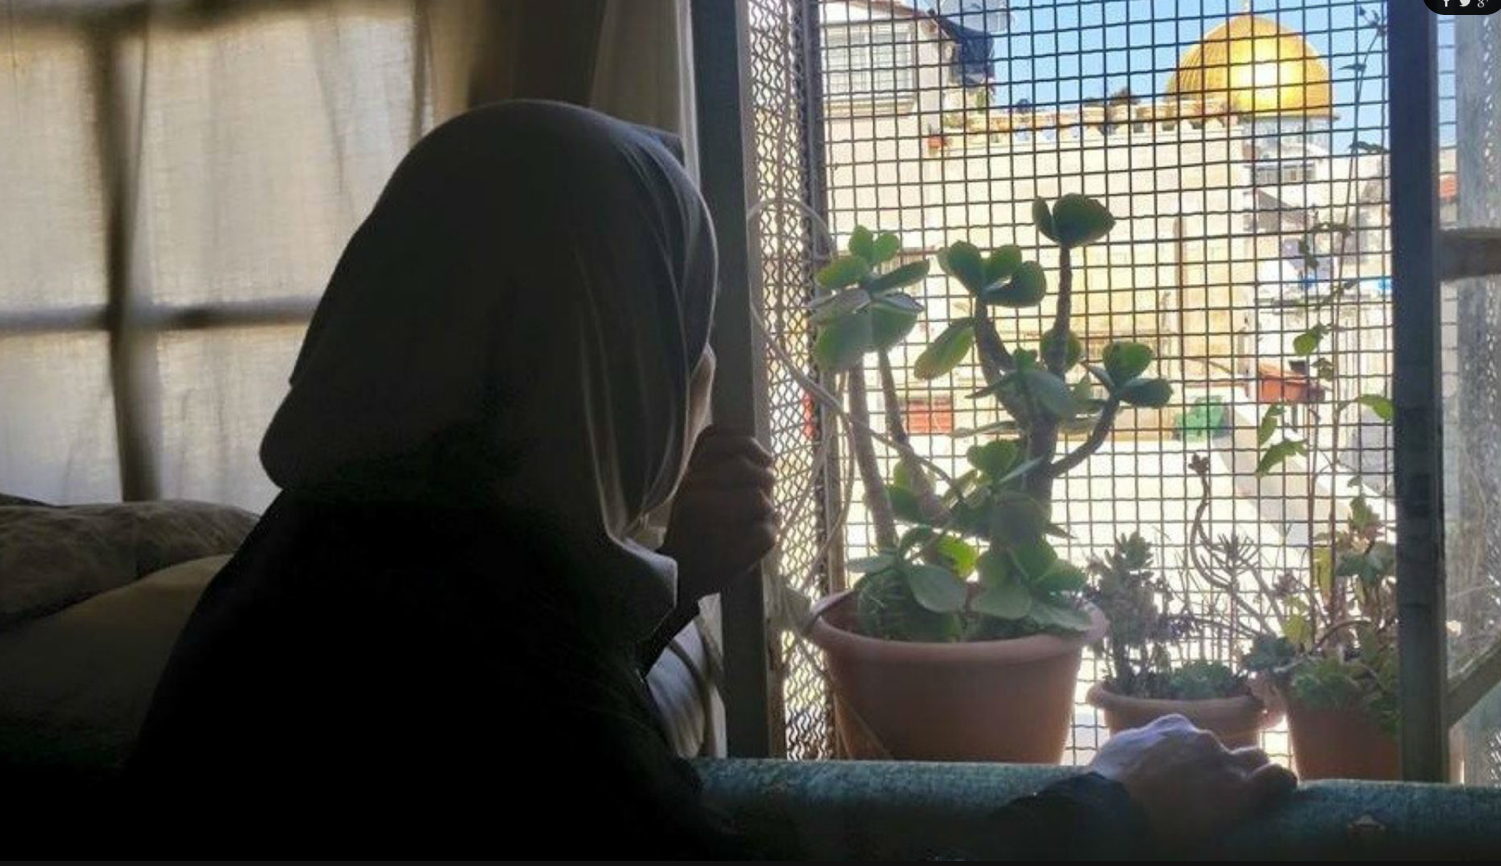 Sheikh Jarrah: A Tale of Eviction and Resettlement